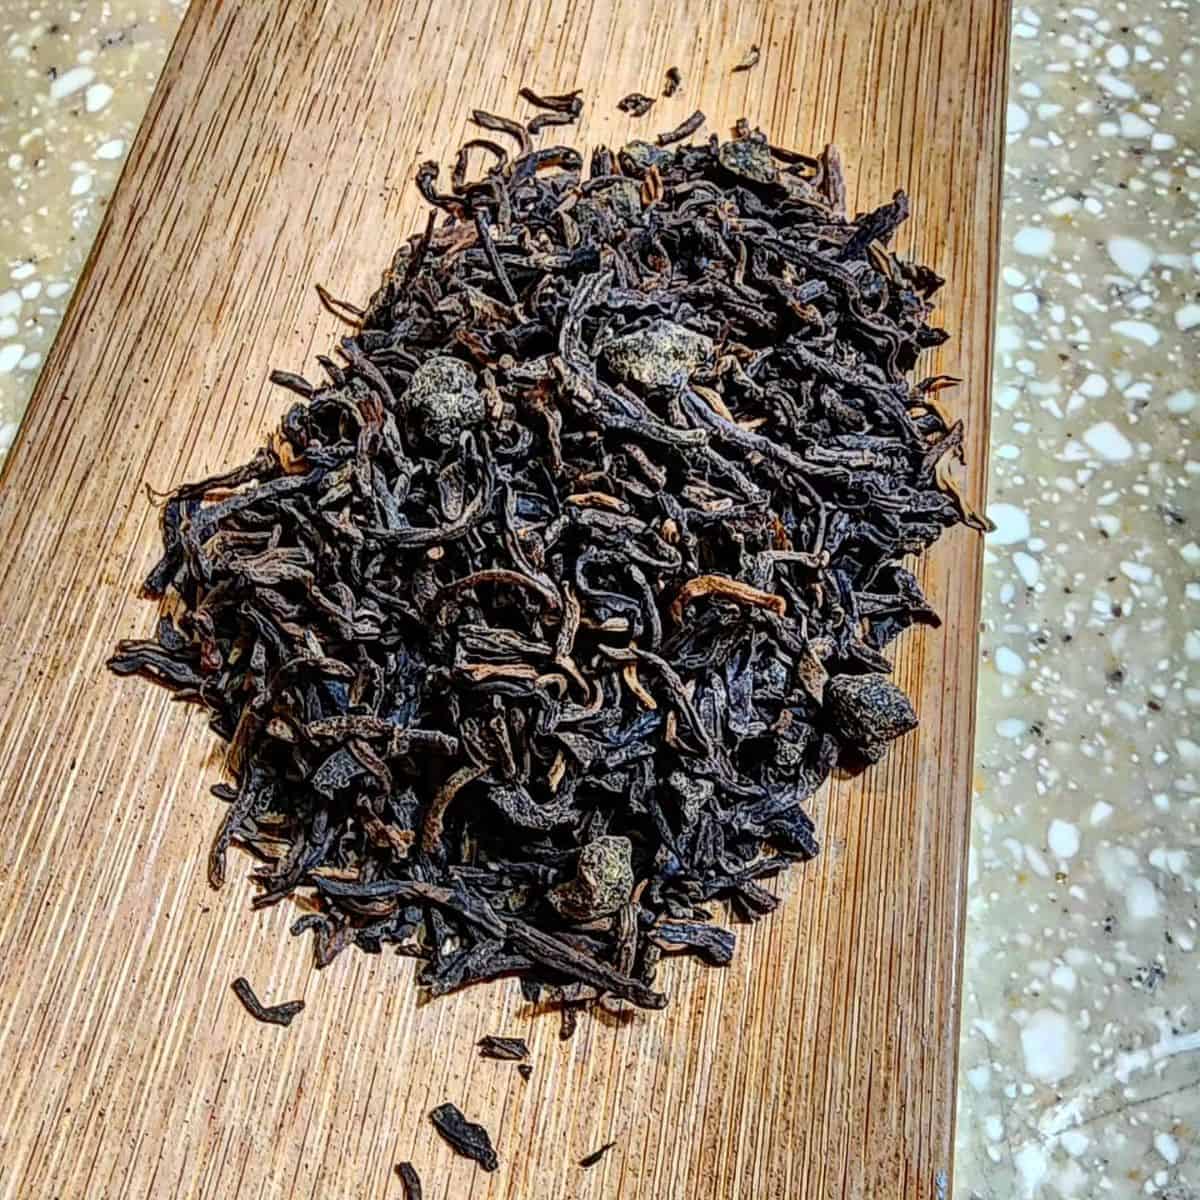 Dried loose tea leaves on a woody table